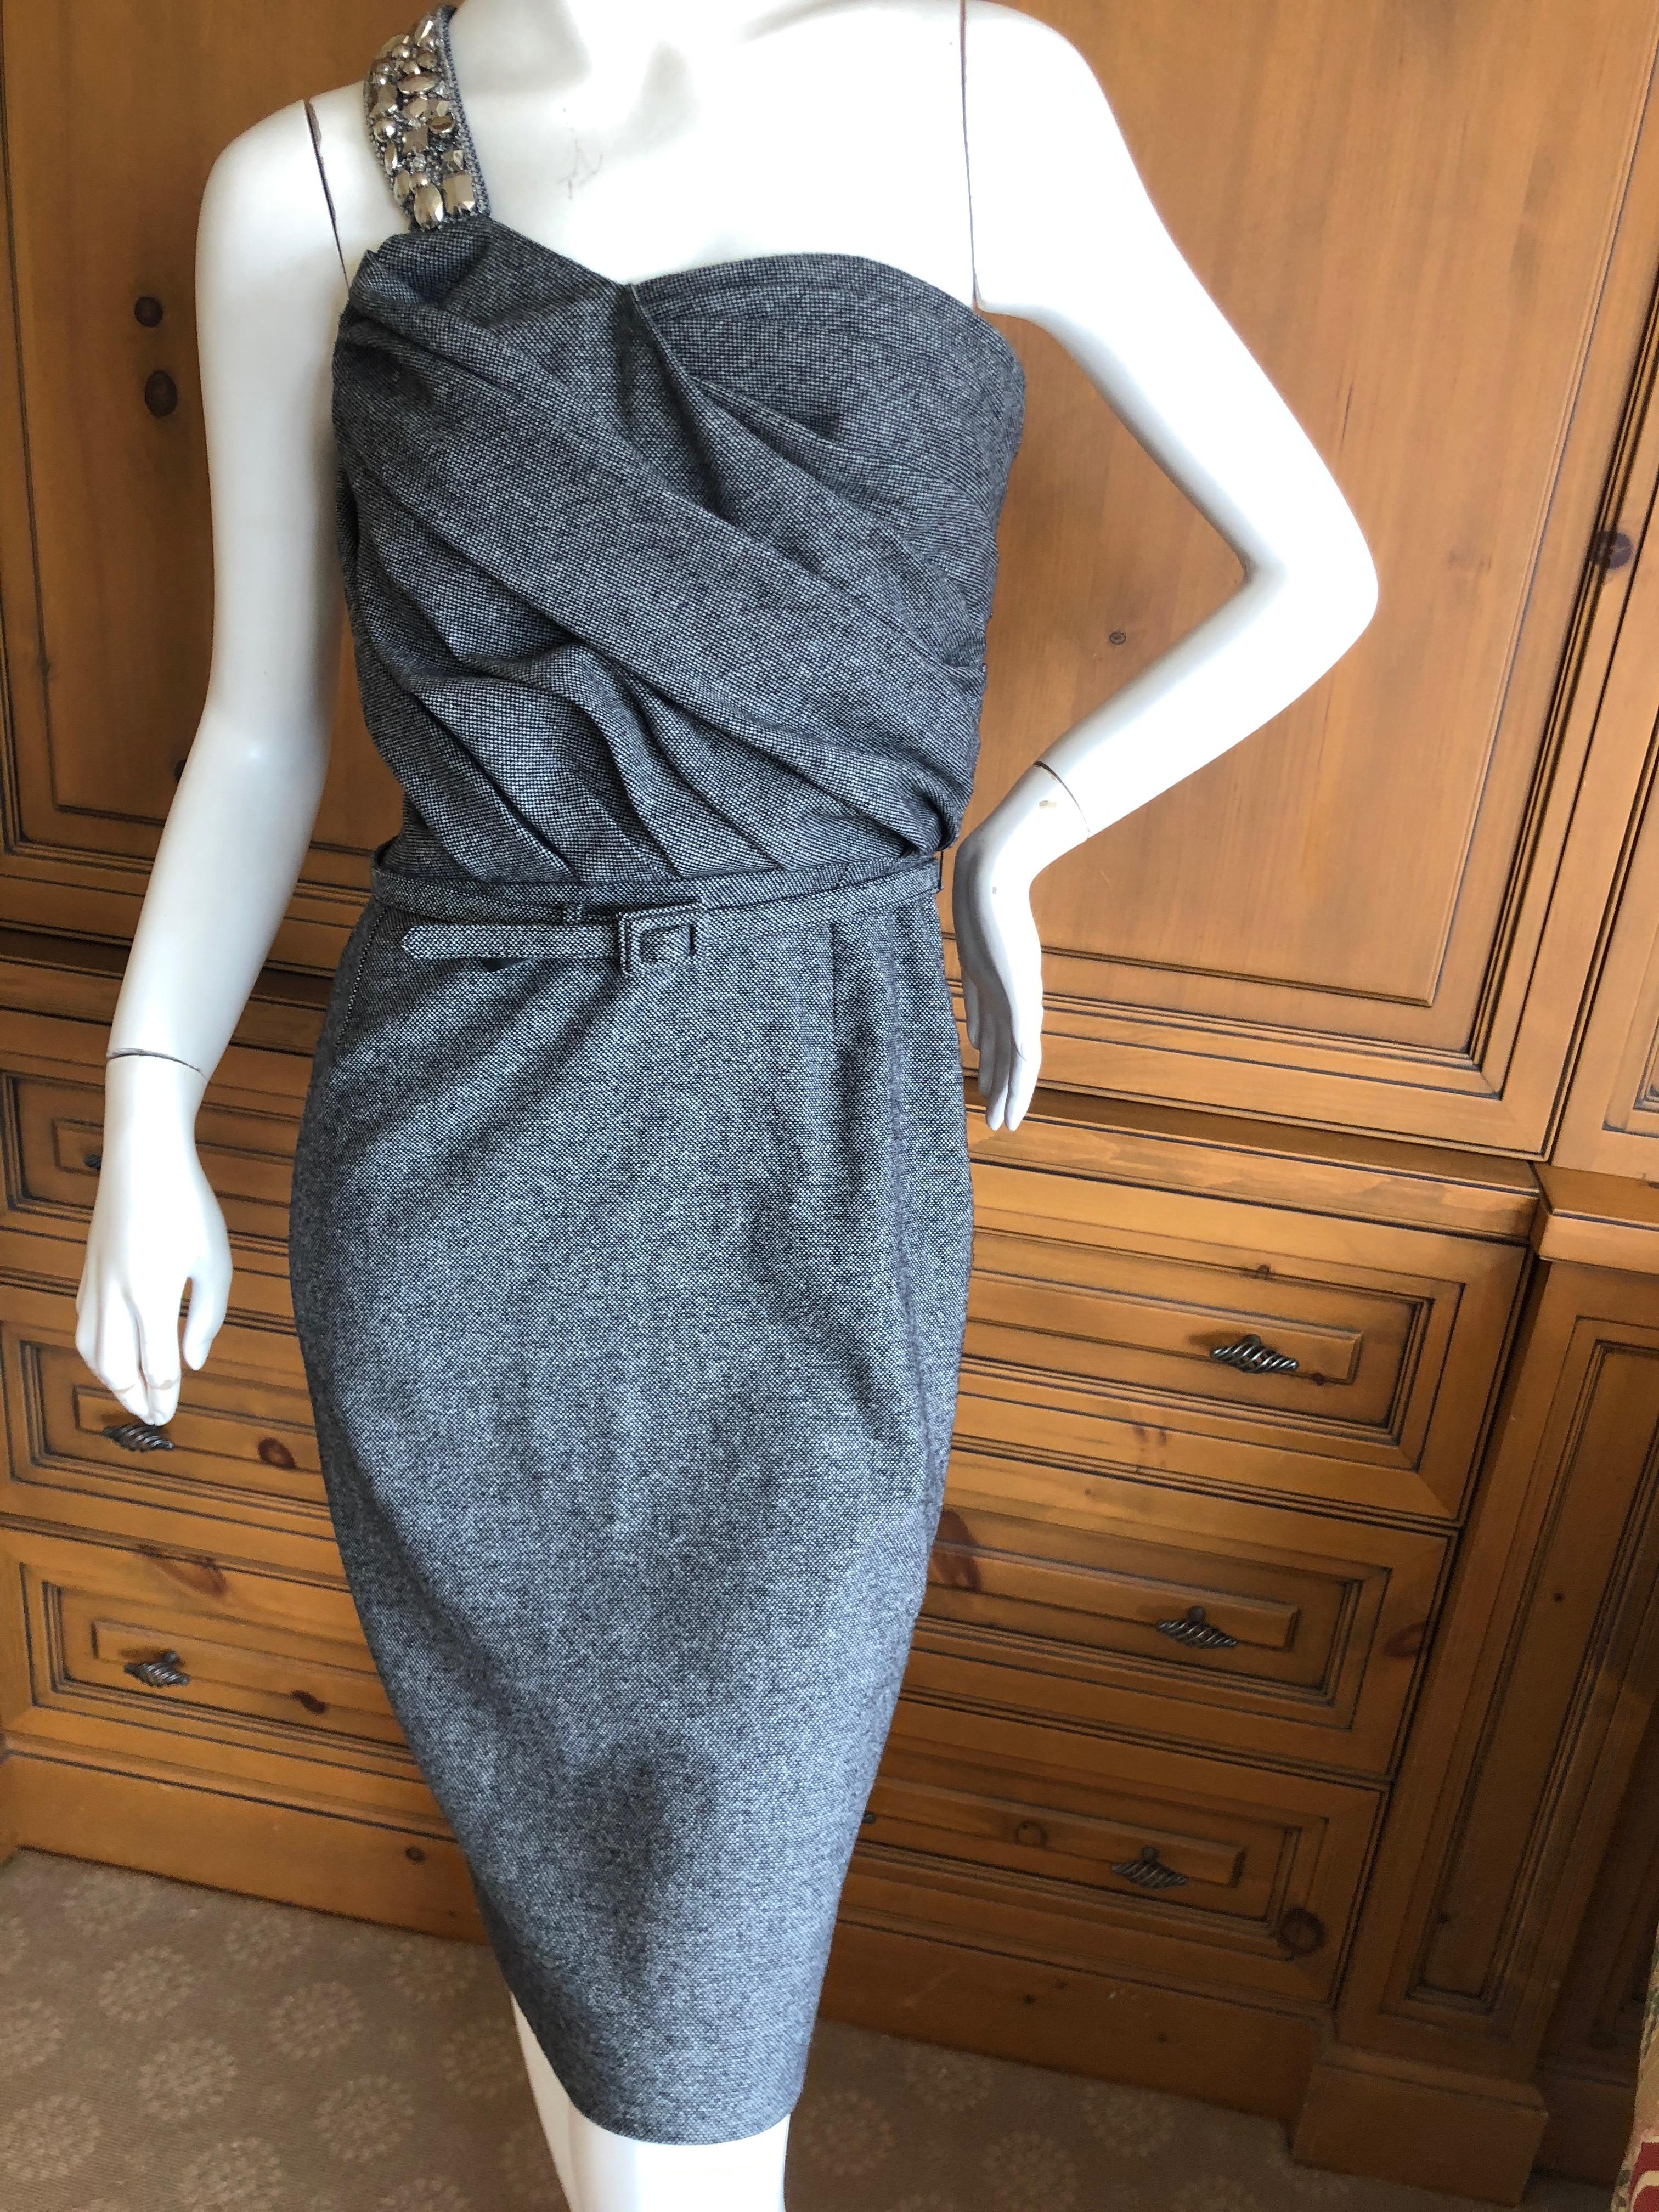 Christian Dior John Galliano Gray Tweed Cocktail Dress with Jewel Shoulder Strap For Sale 2